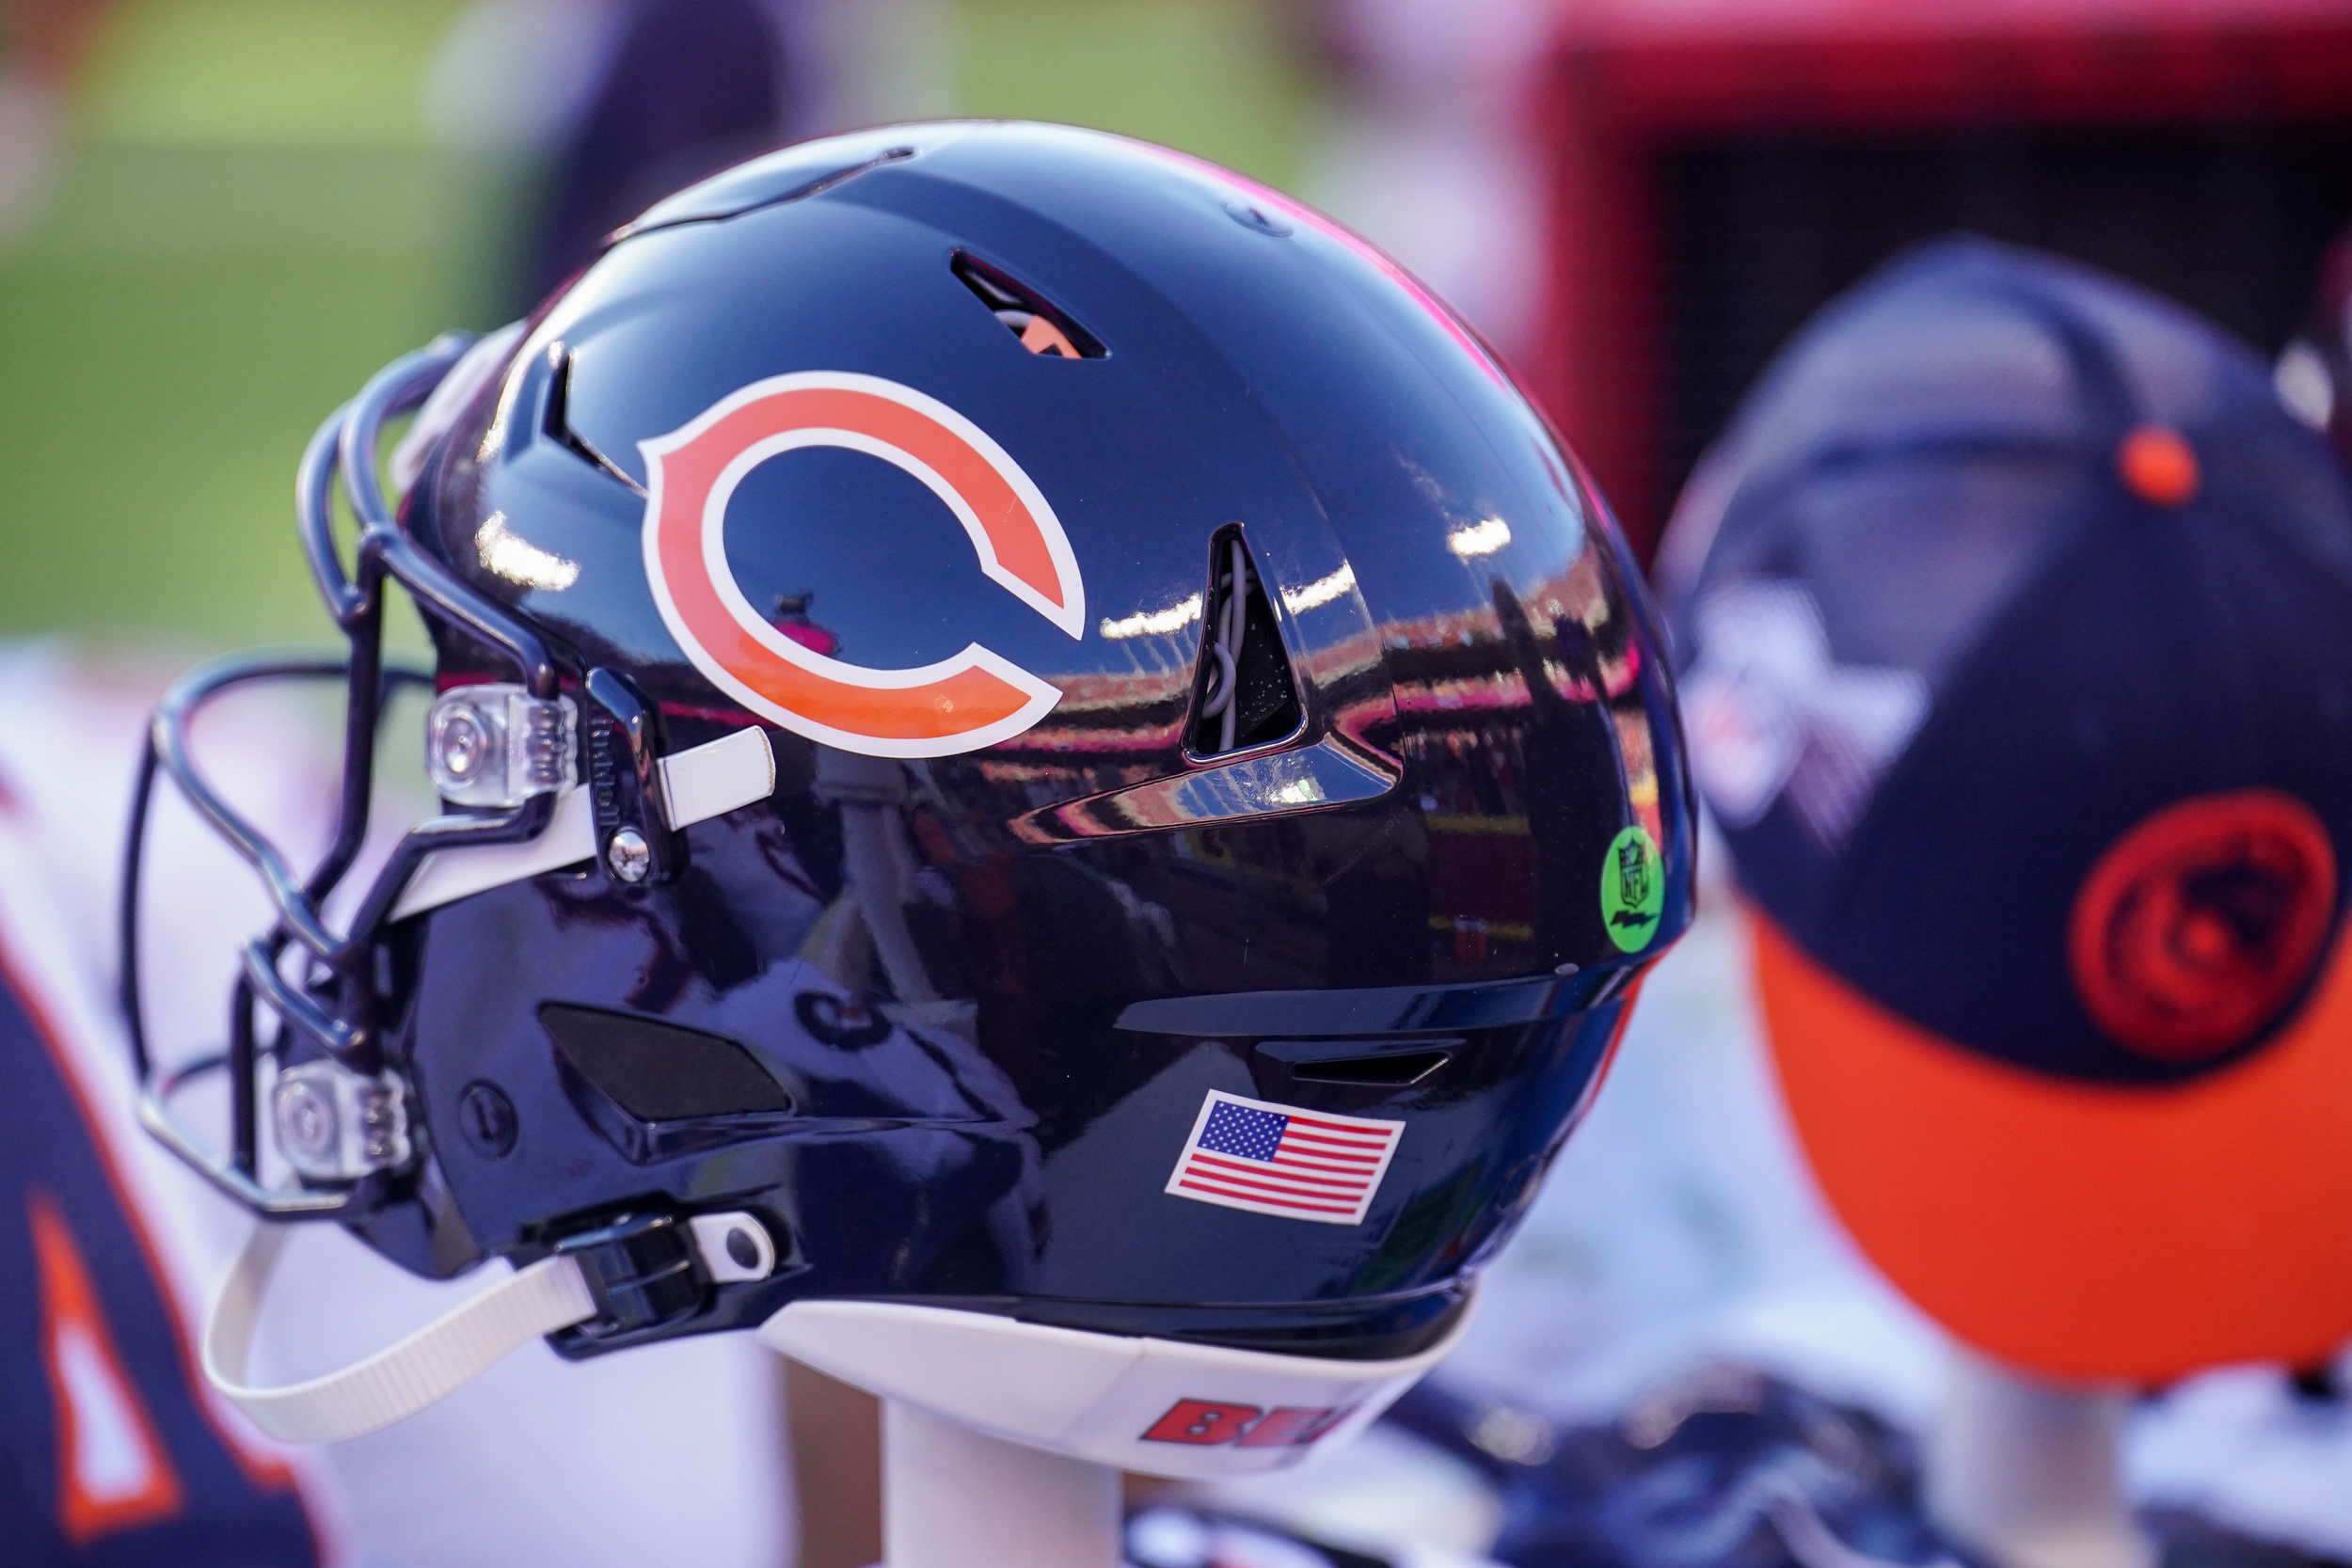 report: former bears quarterback died from cancer